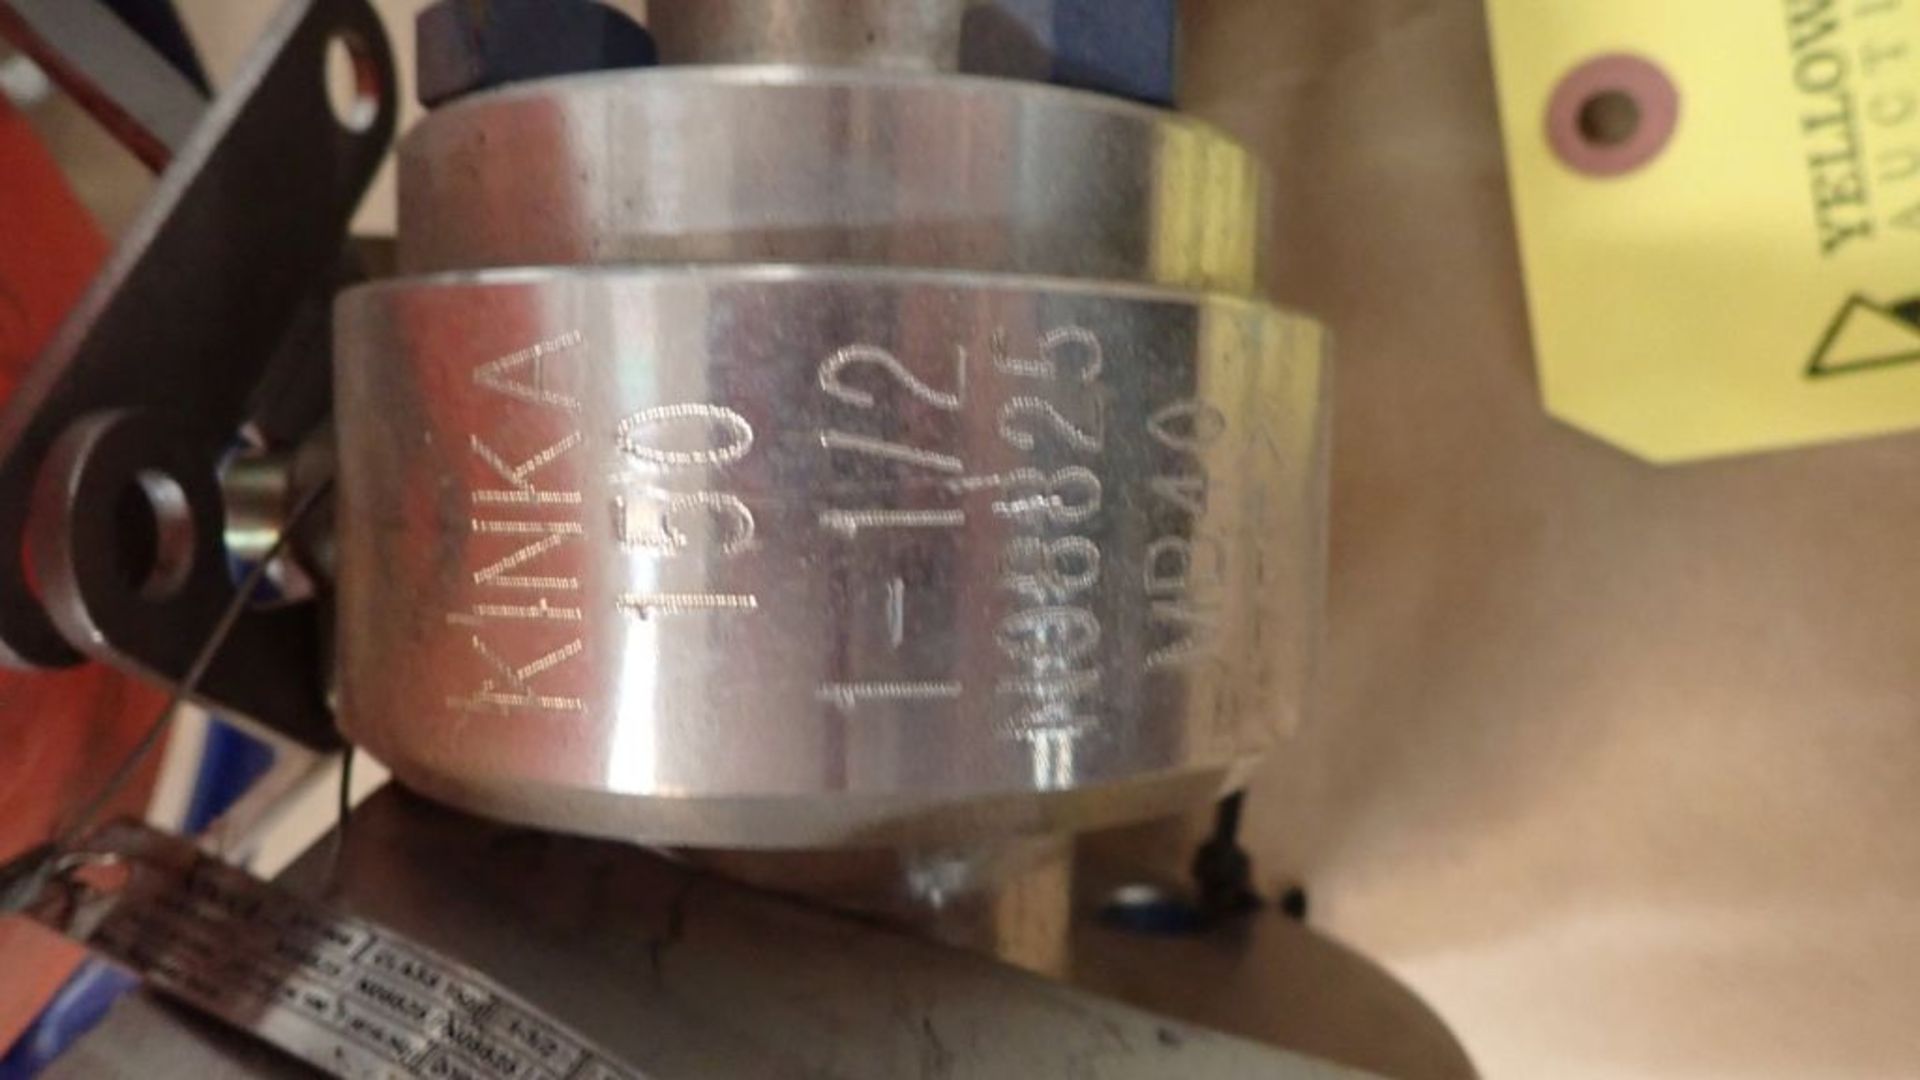 Lot of (2) Kinka 1-1/2" Alloy 825 Valves | Class-150; N08825 Body; Tag: 245207 - Image 3 of 5